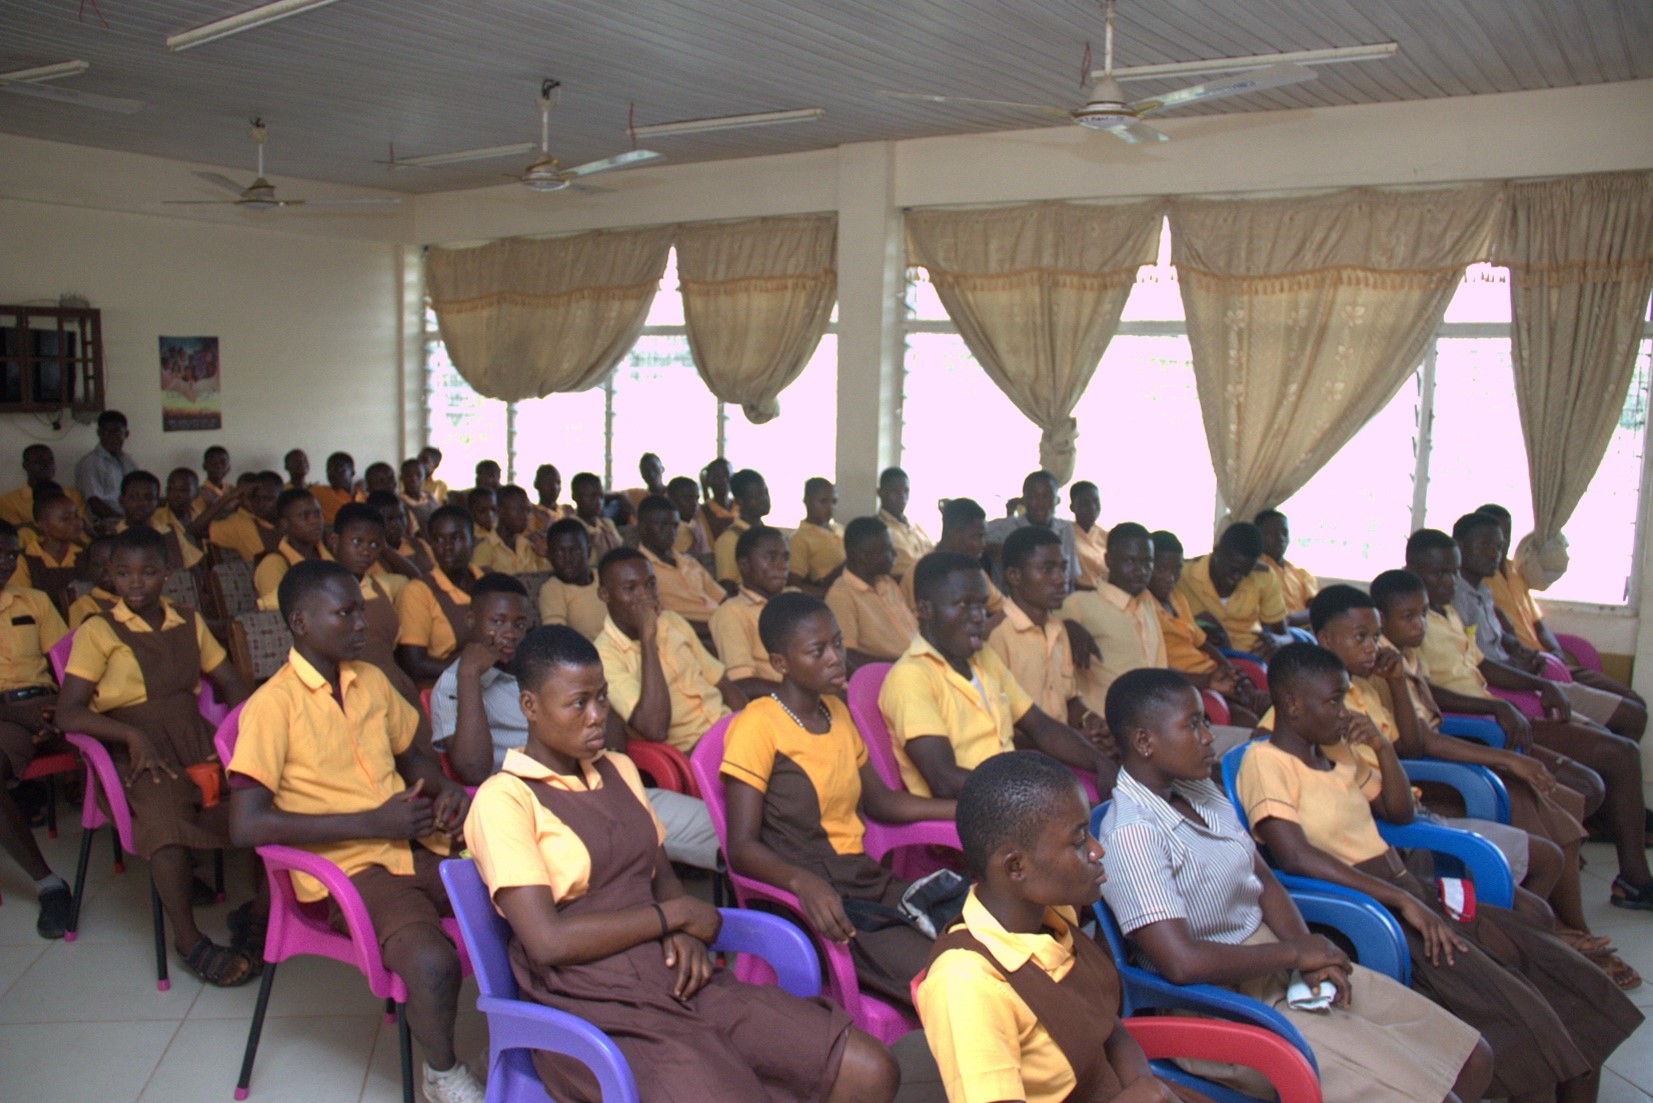 A Photograph of a Cross-section of the Students at the Event